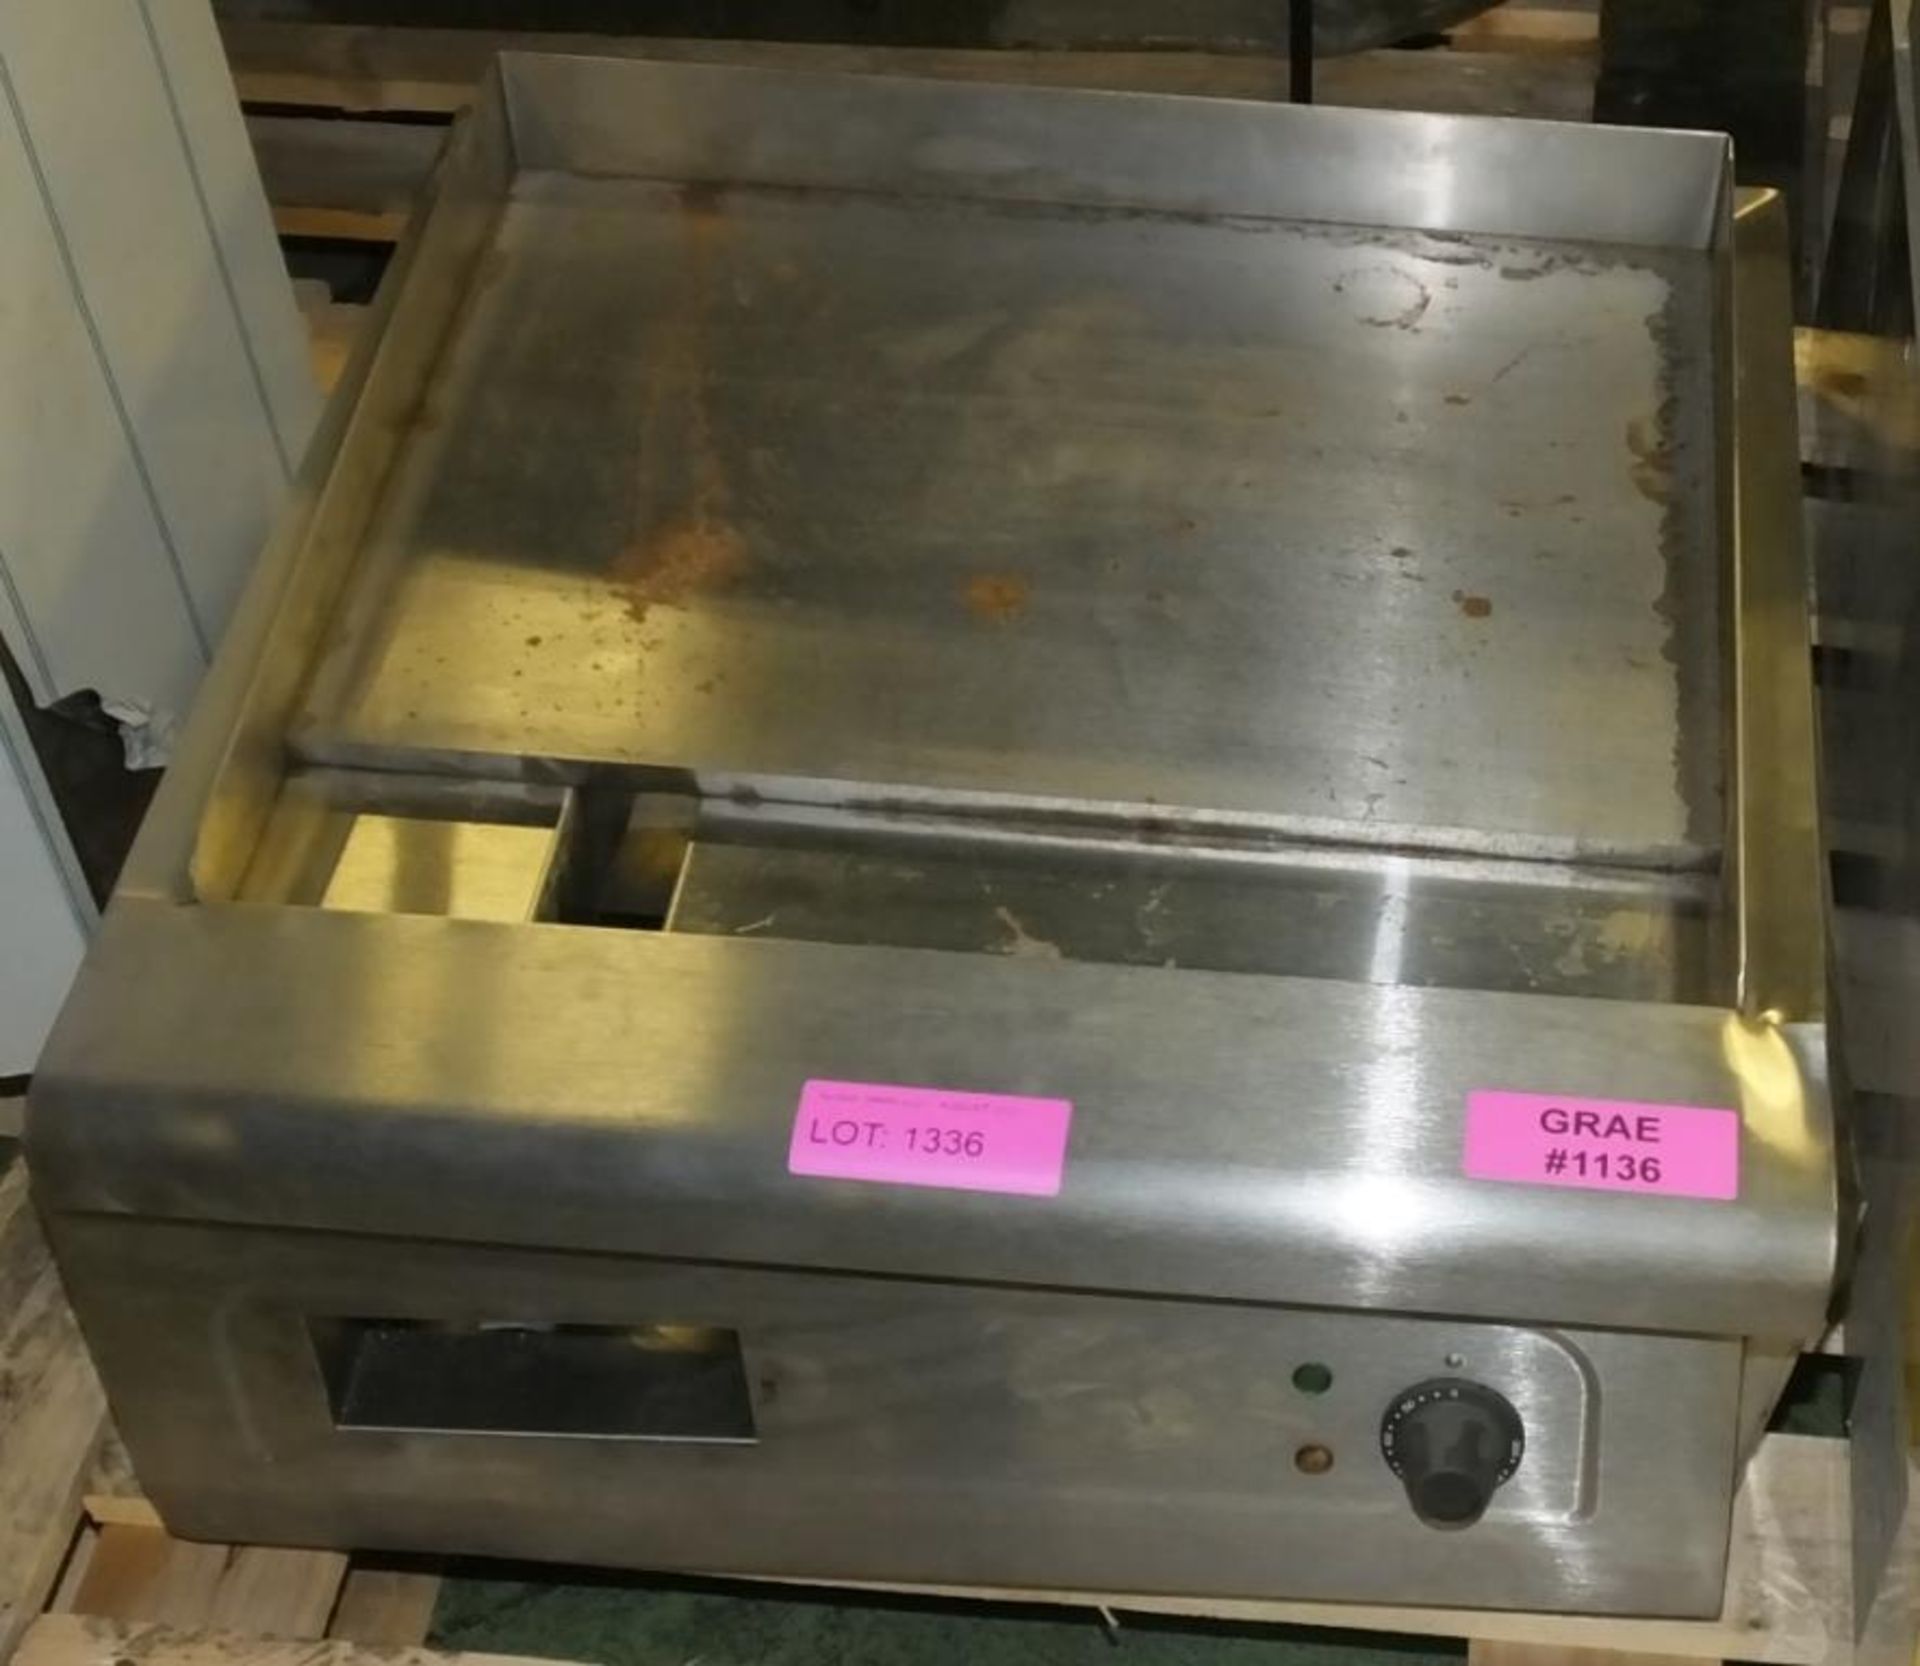 Burco BCO CTGD01 Griddle - Spares or repair.